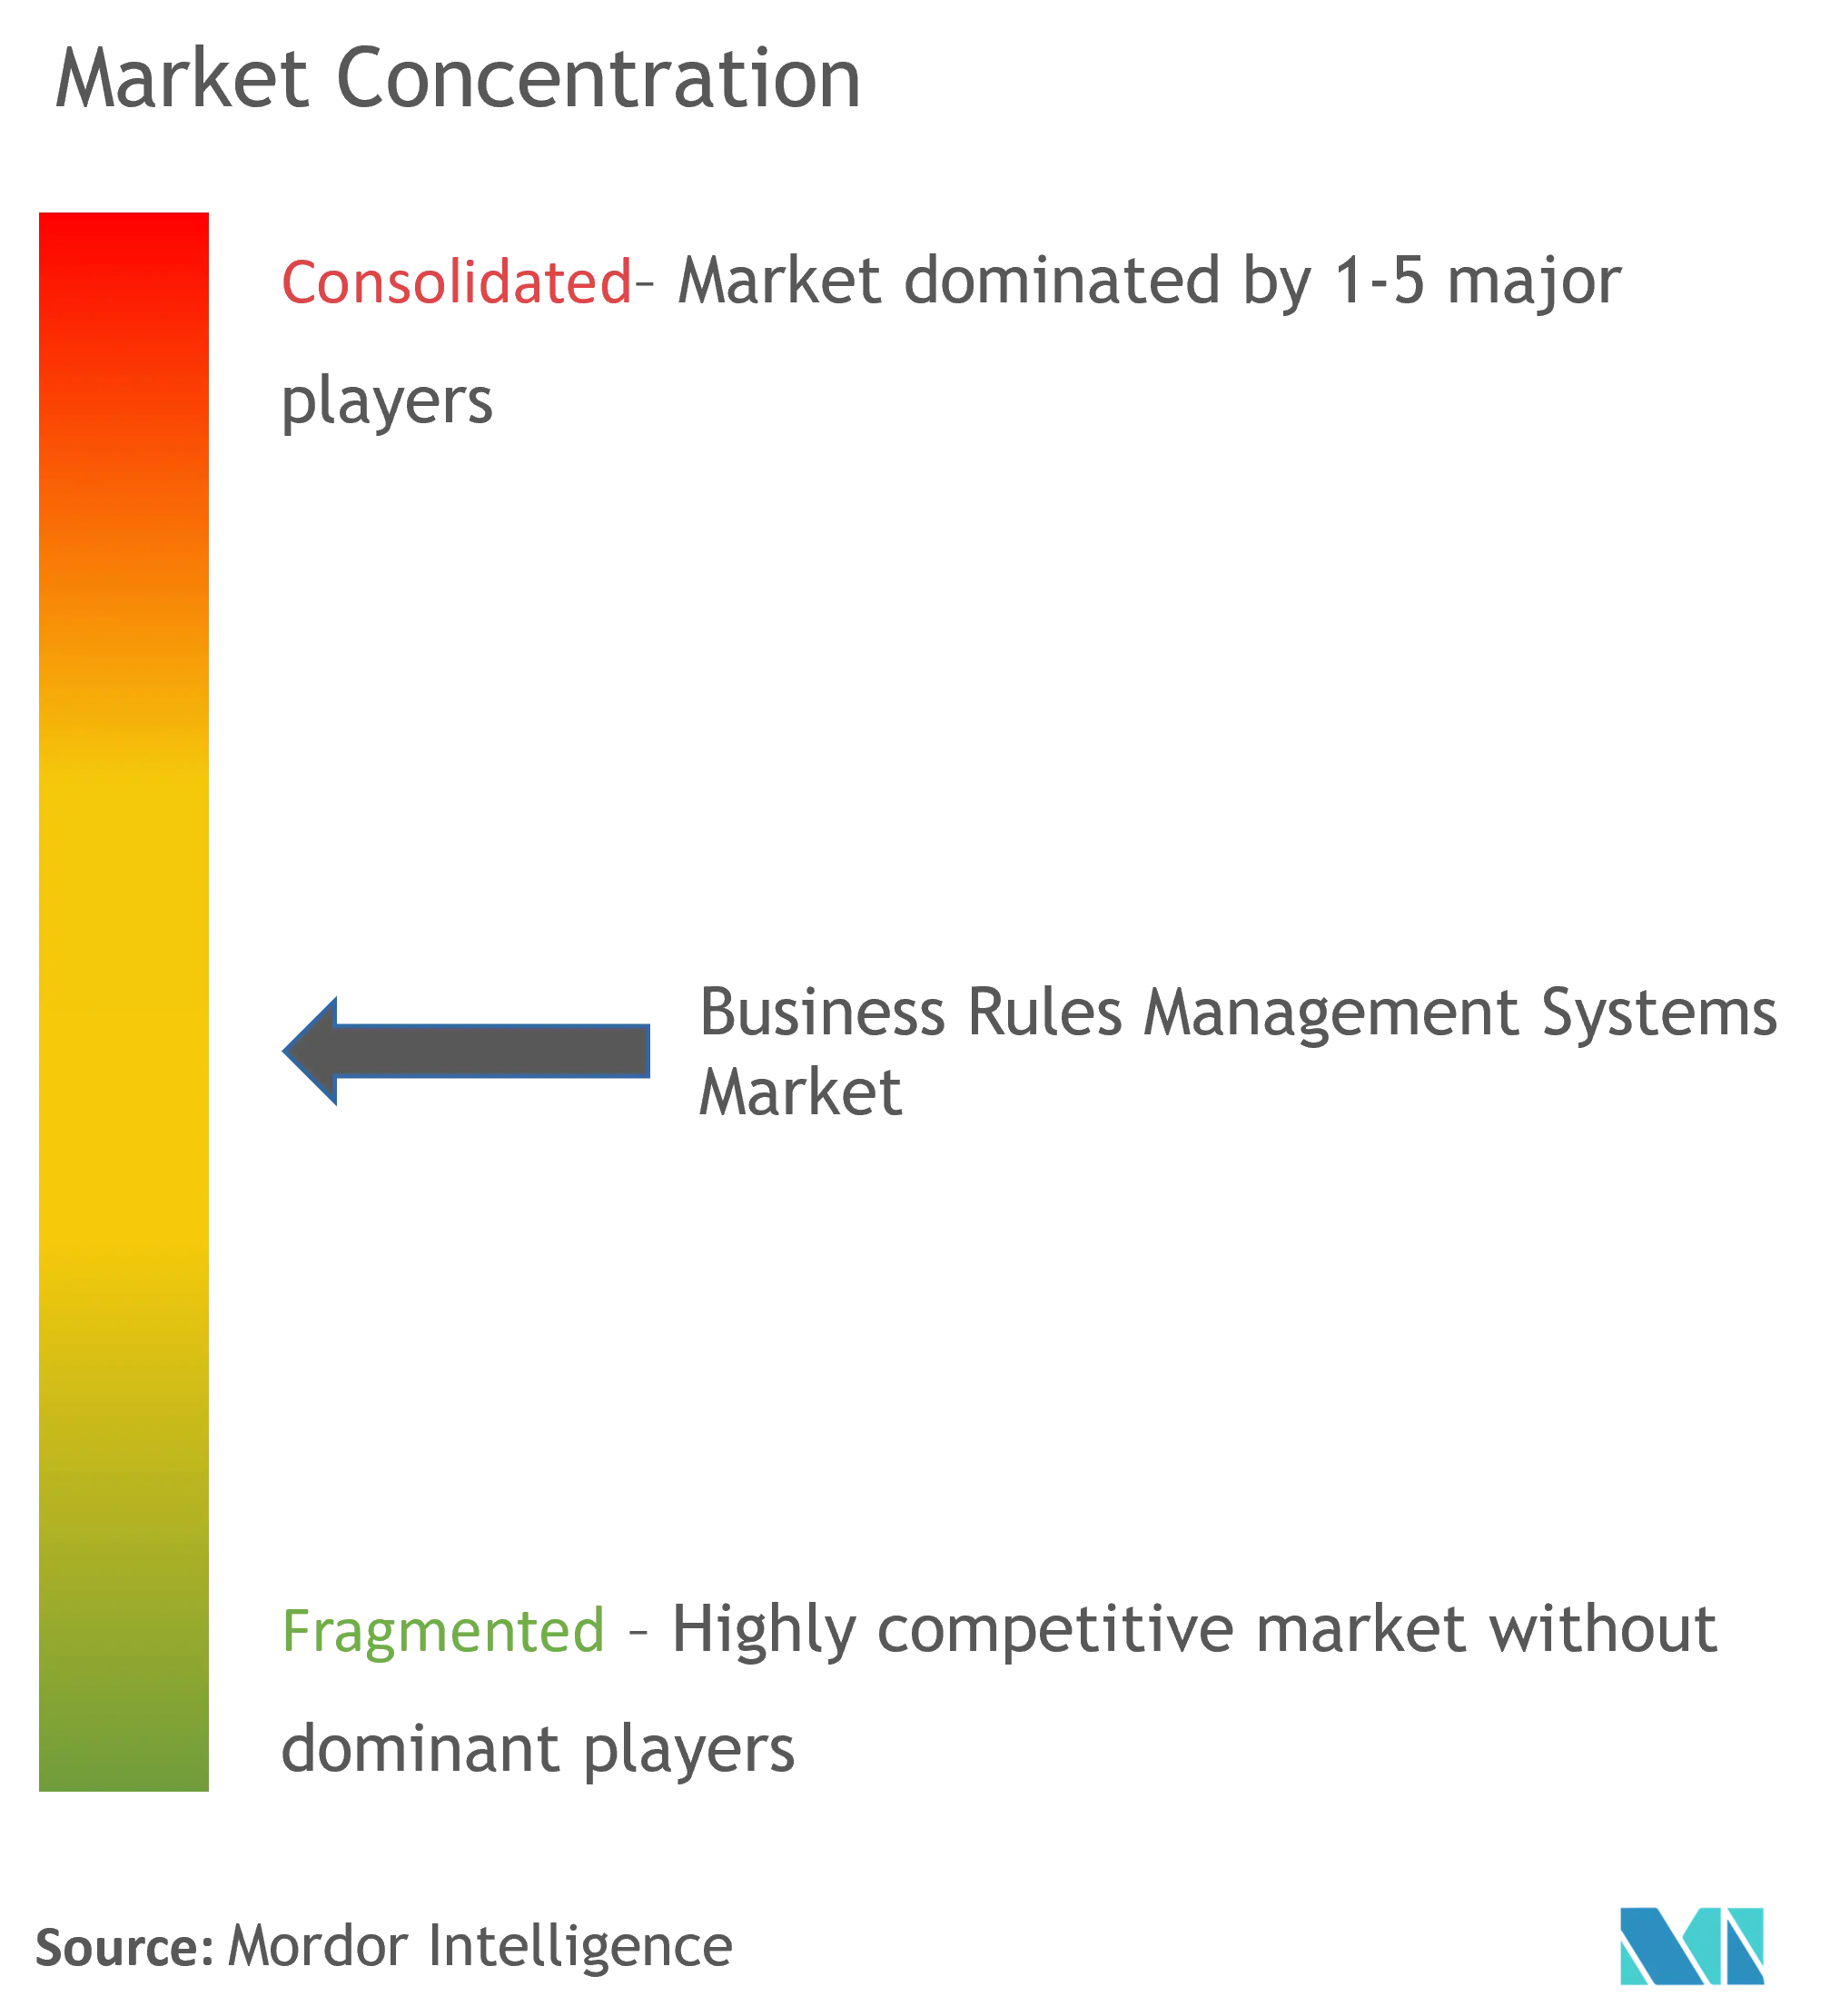 Business Rules Management Systems Market Concentration